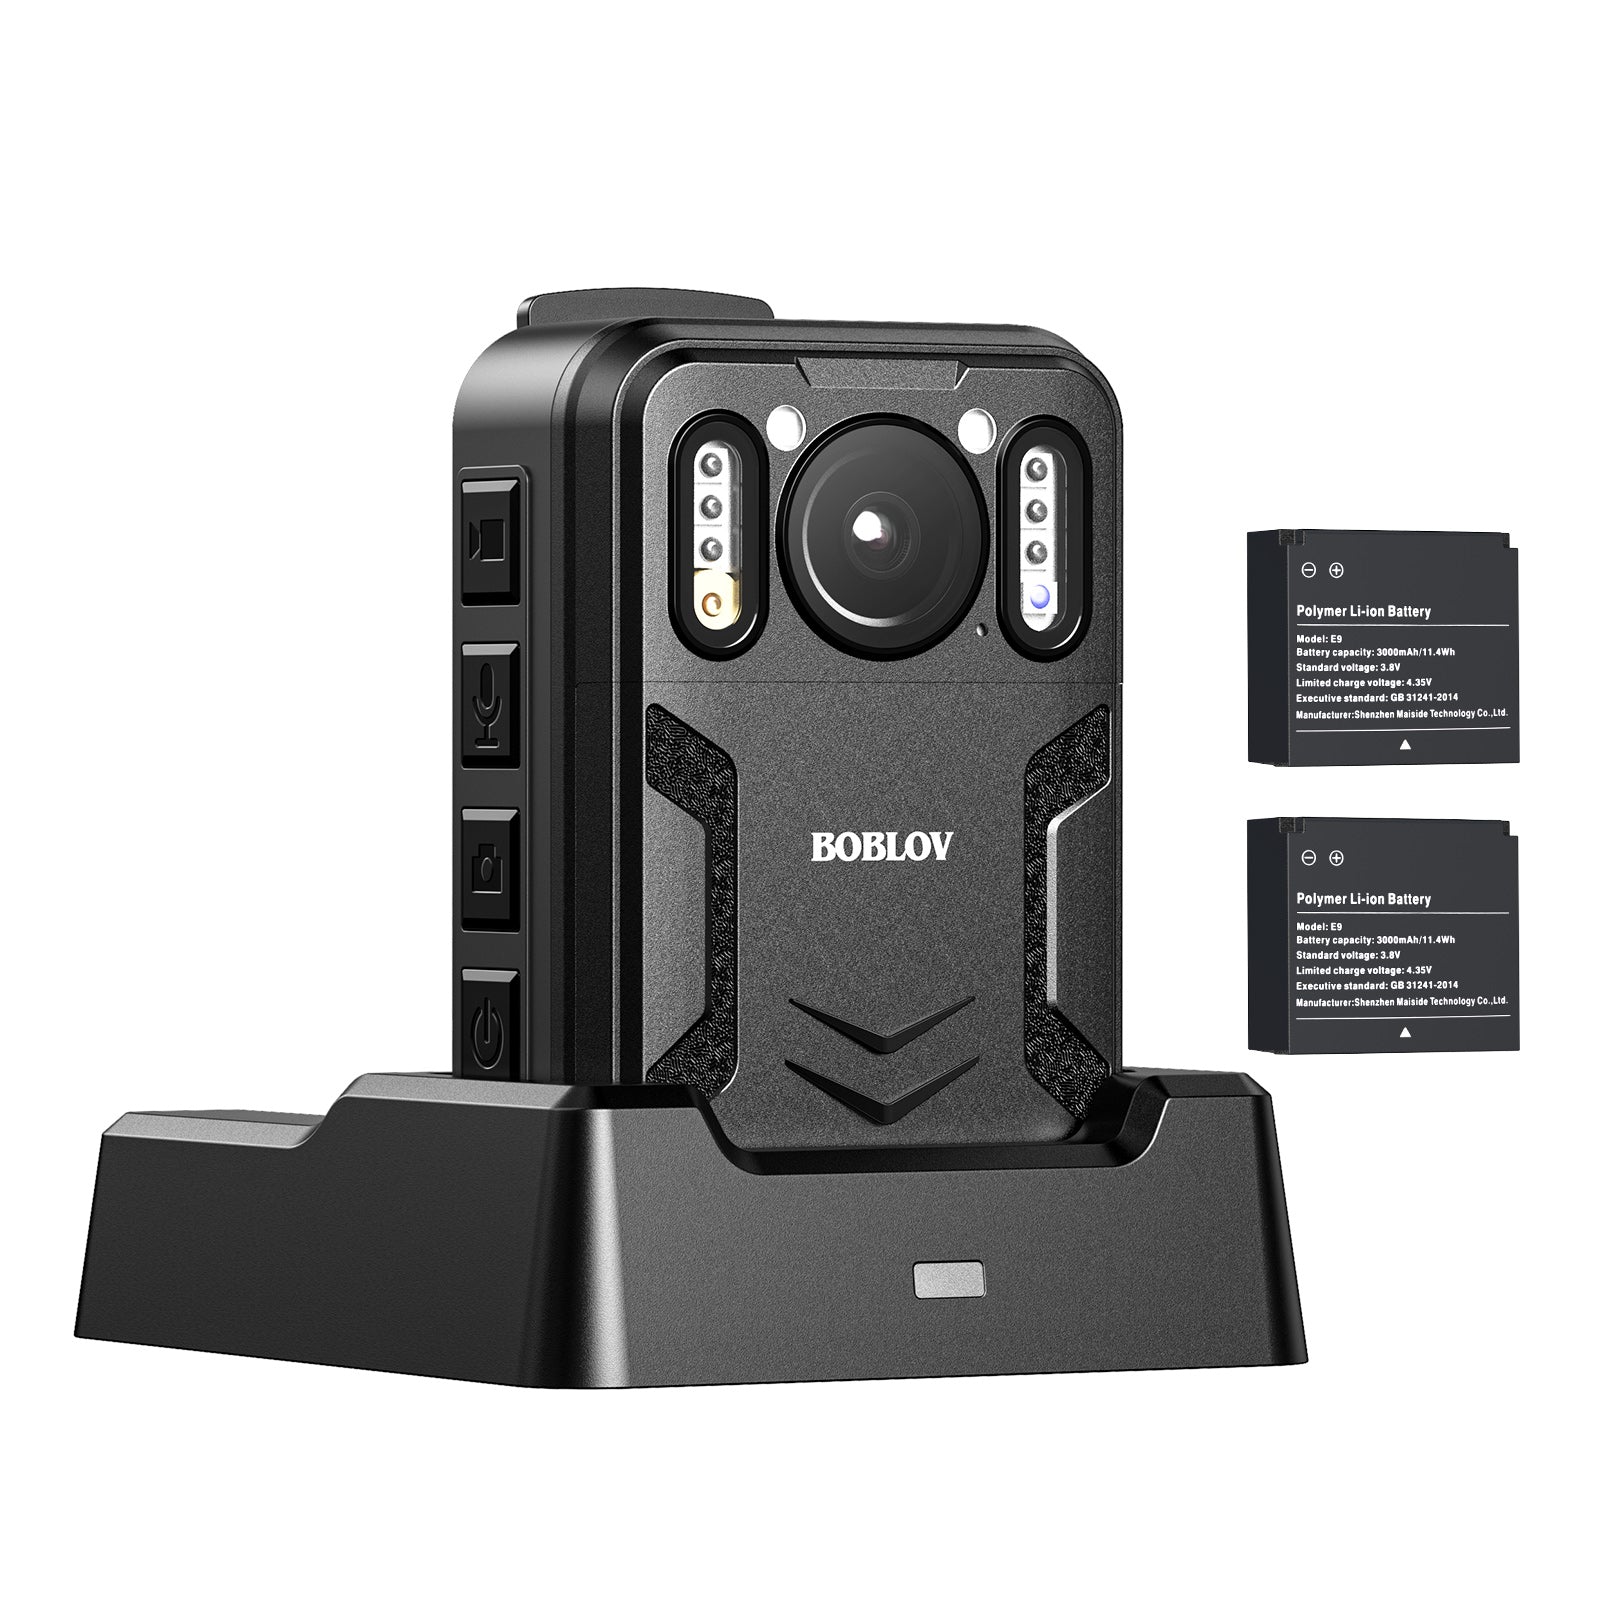 BOBLOV B4K2 128G/256G 4K Body Camera with GPS, Two 3000mAh Batteries for 14-16 Hrs Record, 4K Bodycam with Charging Dock